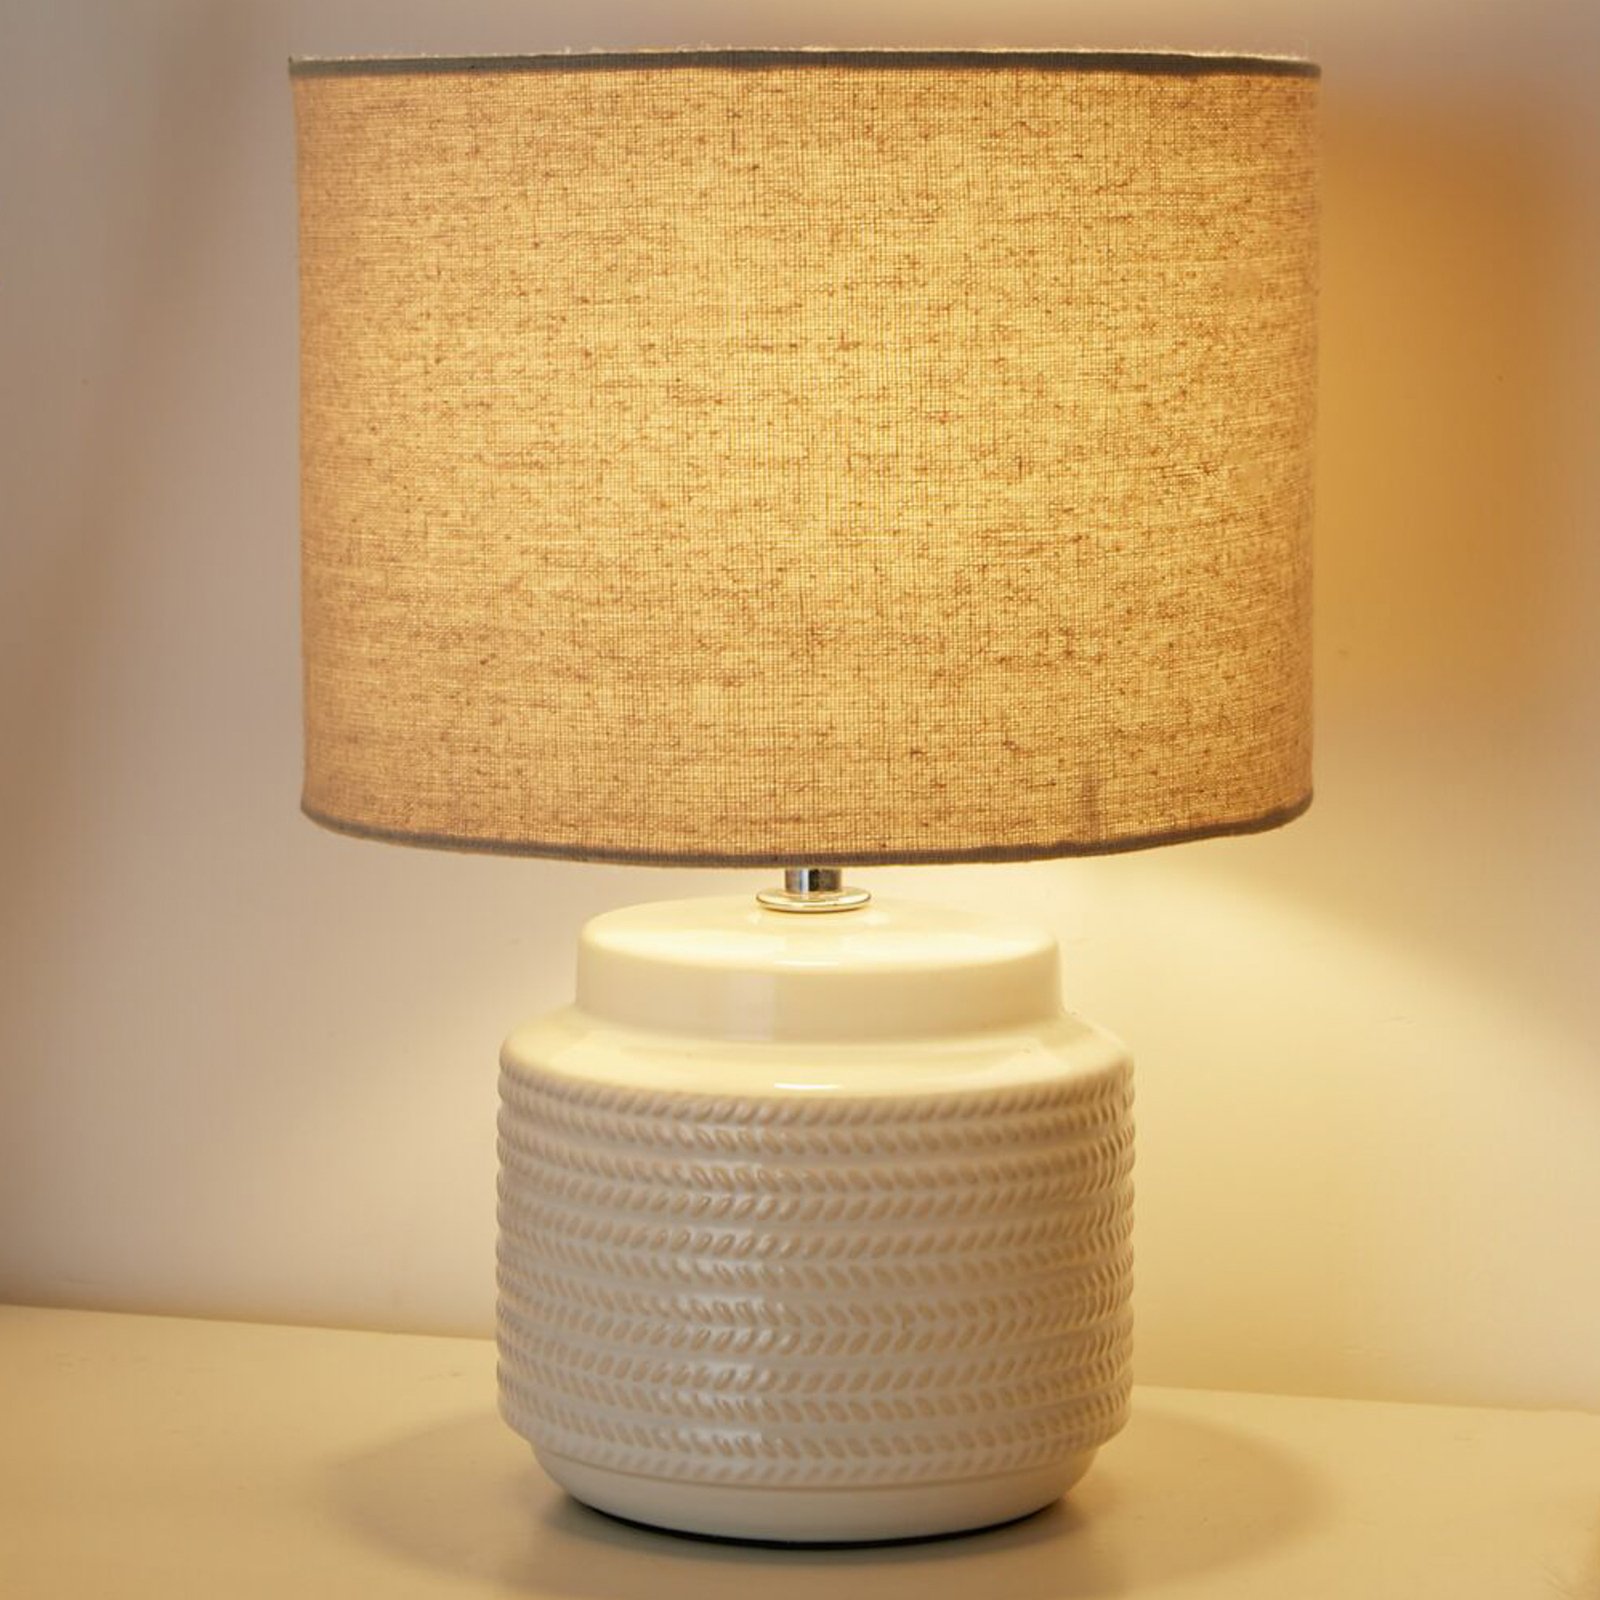 Pauleen Bright Soul table lamp with a ceramic base